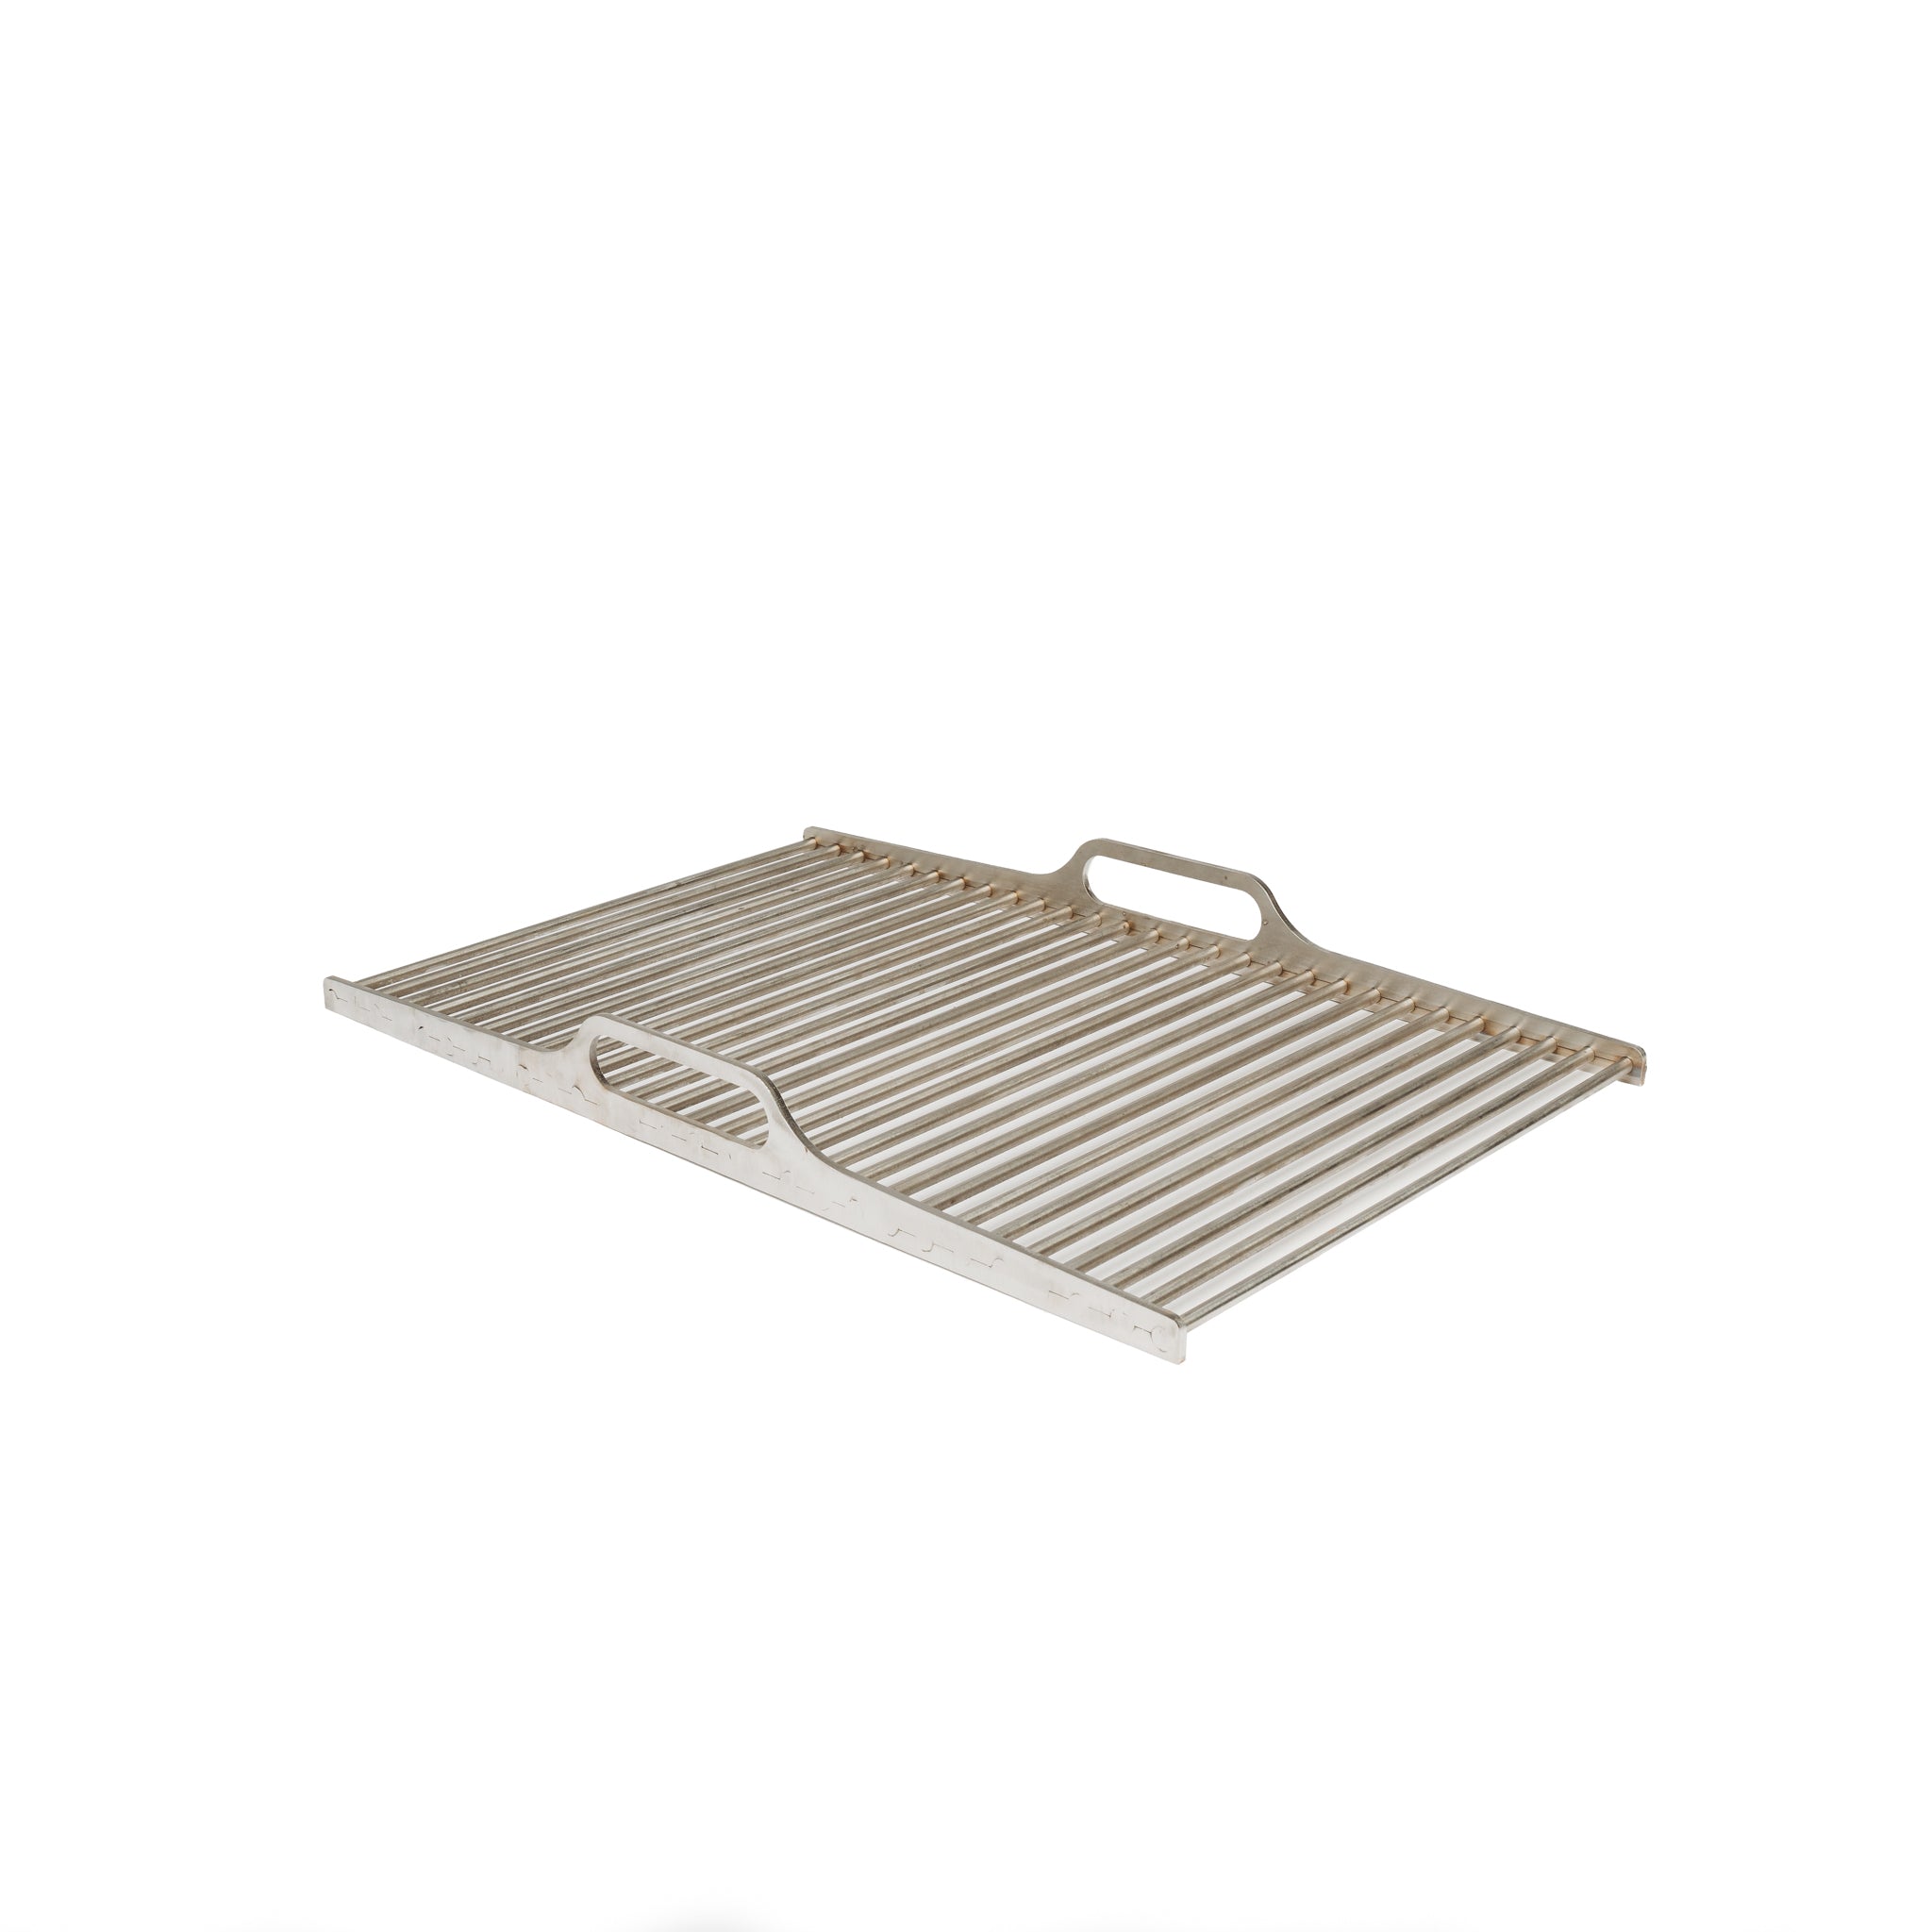 GrillSymbol Griddle Classic XXL 38 x 61 cm 
(suitable for Chef XXL Charcoal BBQ models)